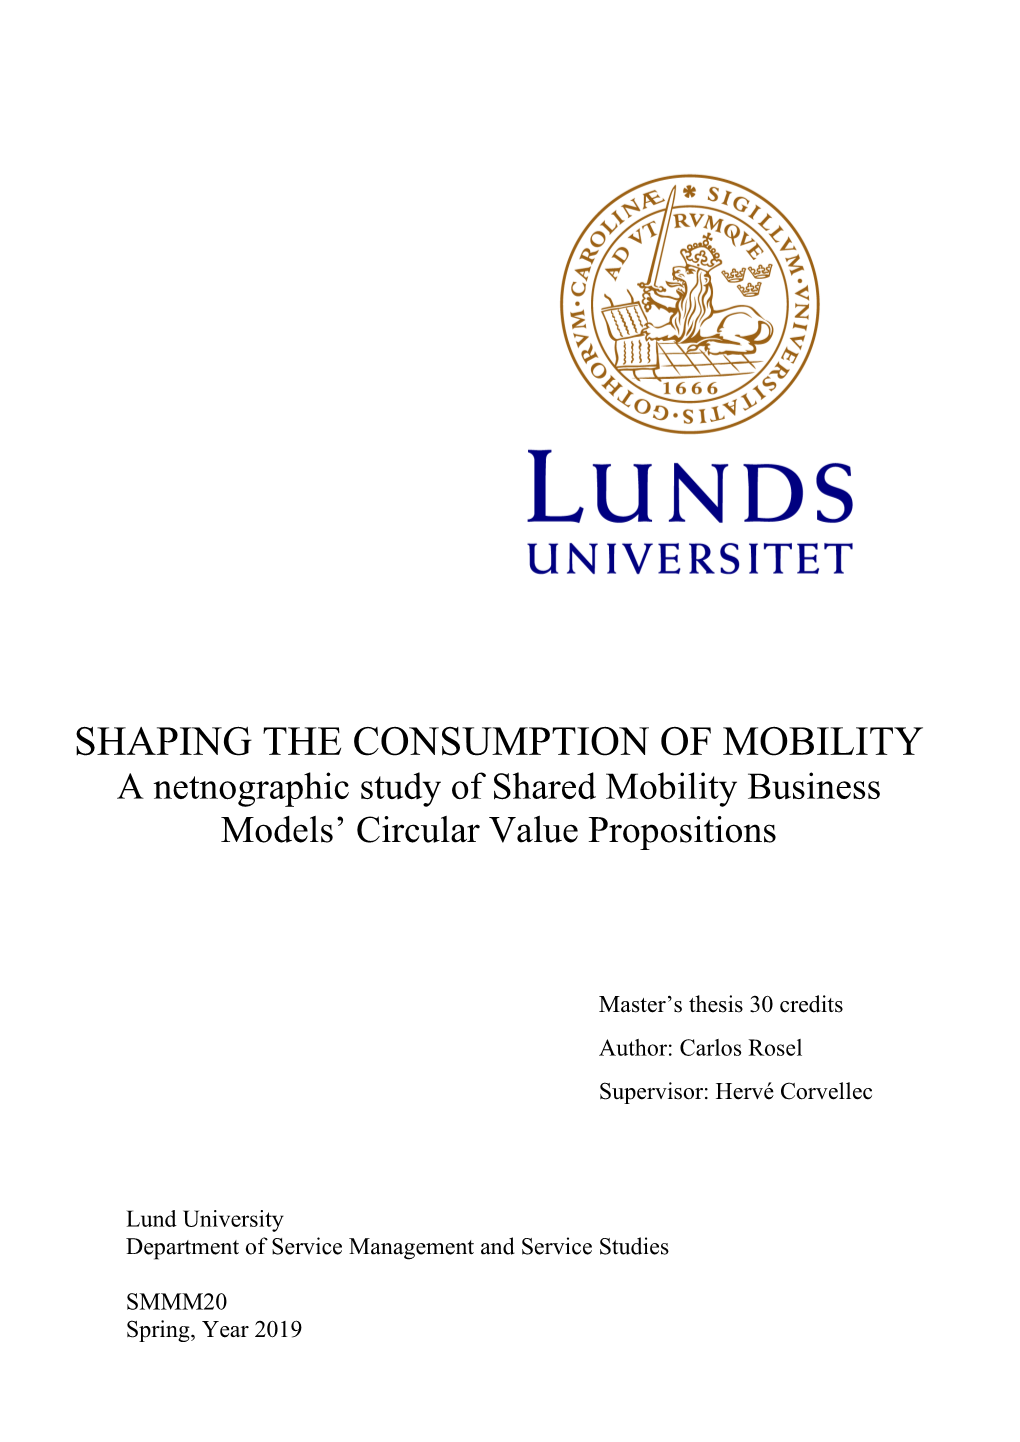 SHAPING the CONSUMPTION of MOBILITY a Netnographic Study of Shared Mobility Business Models’ Circular Value Propositions